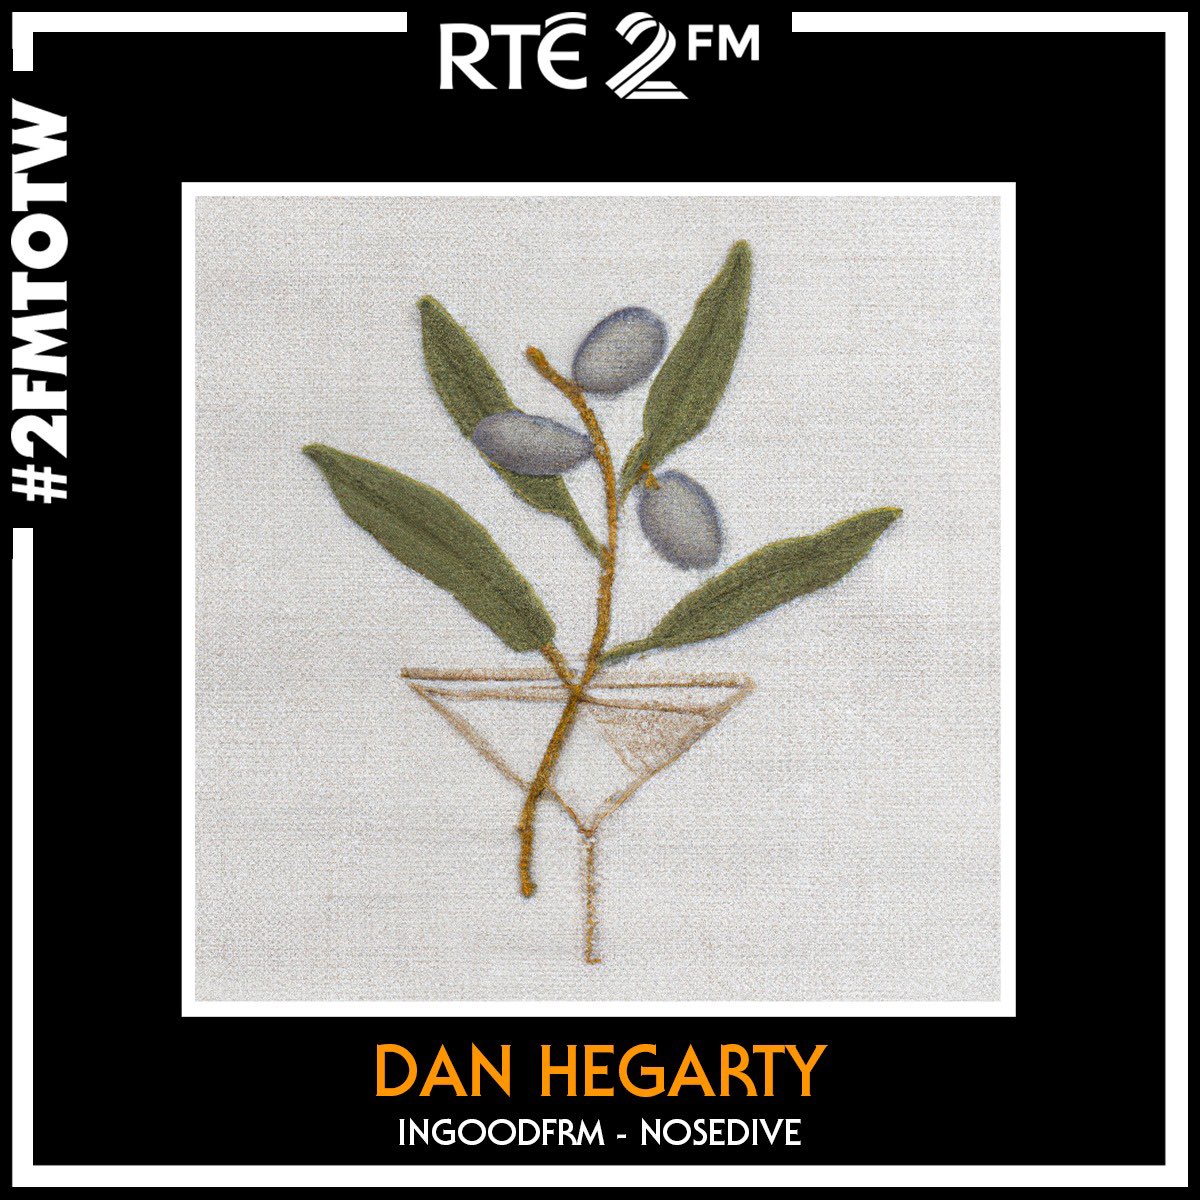 Tonight from 11pm on @RTE2fm - sweet sounds from @sprintsmusic, @garbage, @SkullThePierre, @THE_EELS, @EverythingShook, @FirstAndCoach, @wearebadhands, my #2FMTOTW by @ingoodfrm, plus from the Session Archives: @bitchfalcon (2020), Scheer (1994), & @meltybrains (2023)